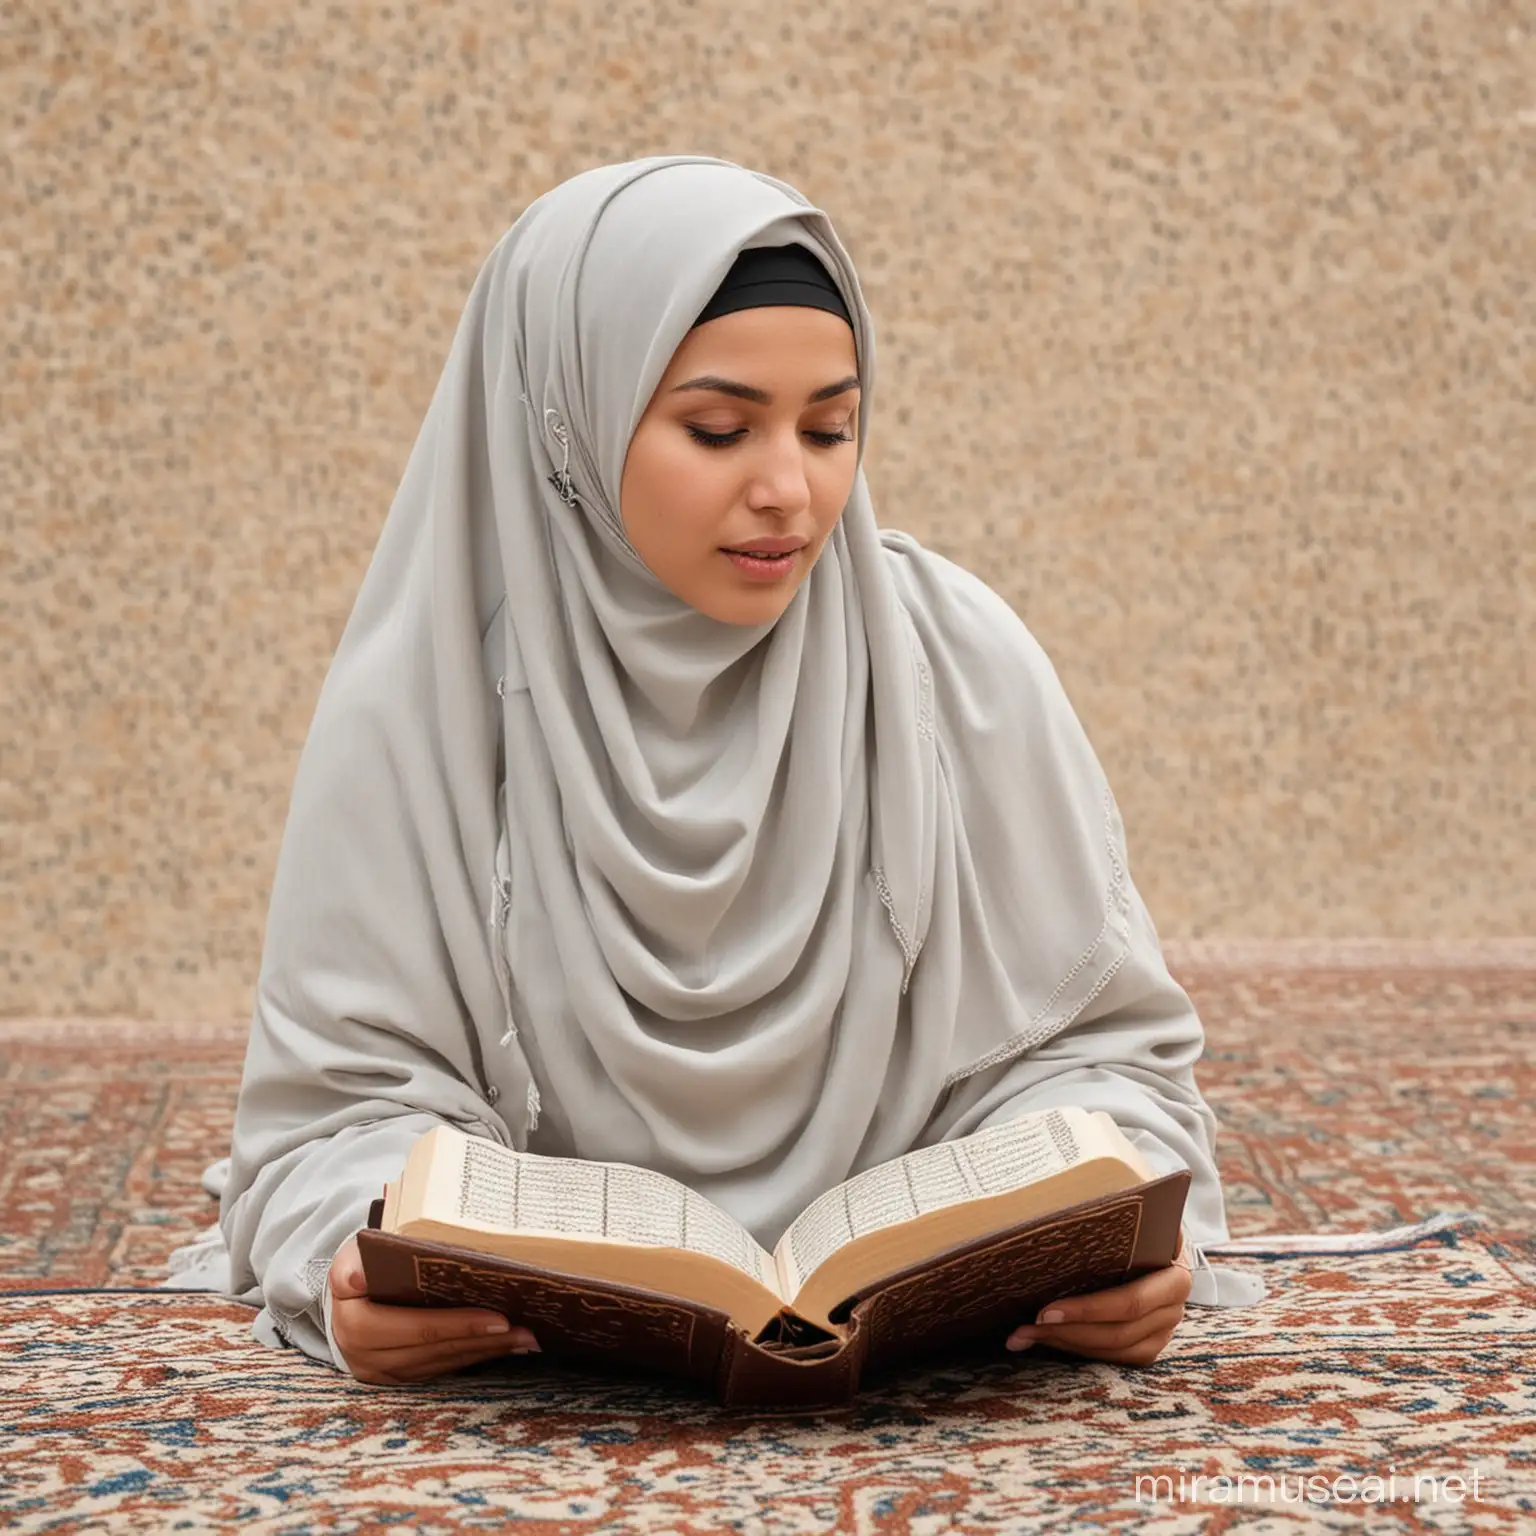 Devout Muslim Woman Reciting the Holy Quran in Peaceful Prayer